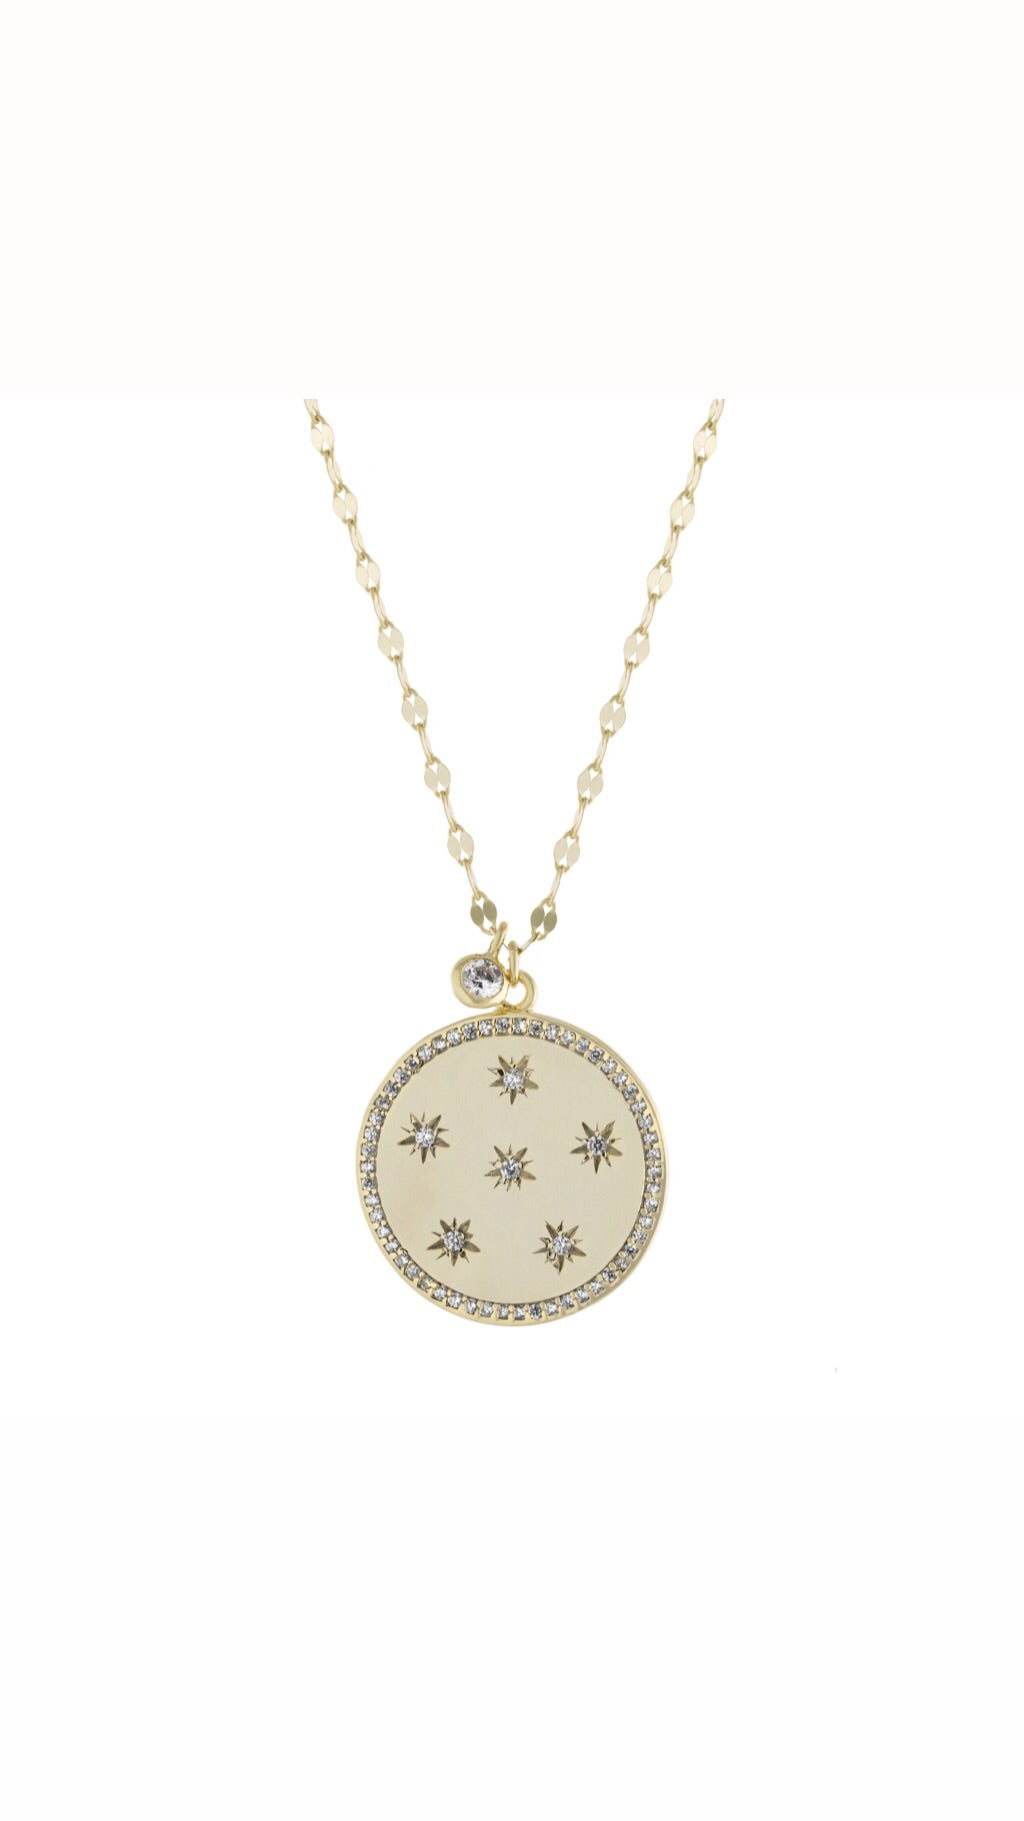 Star Coin Necklace - Retail Therapy Jewelry